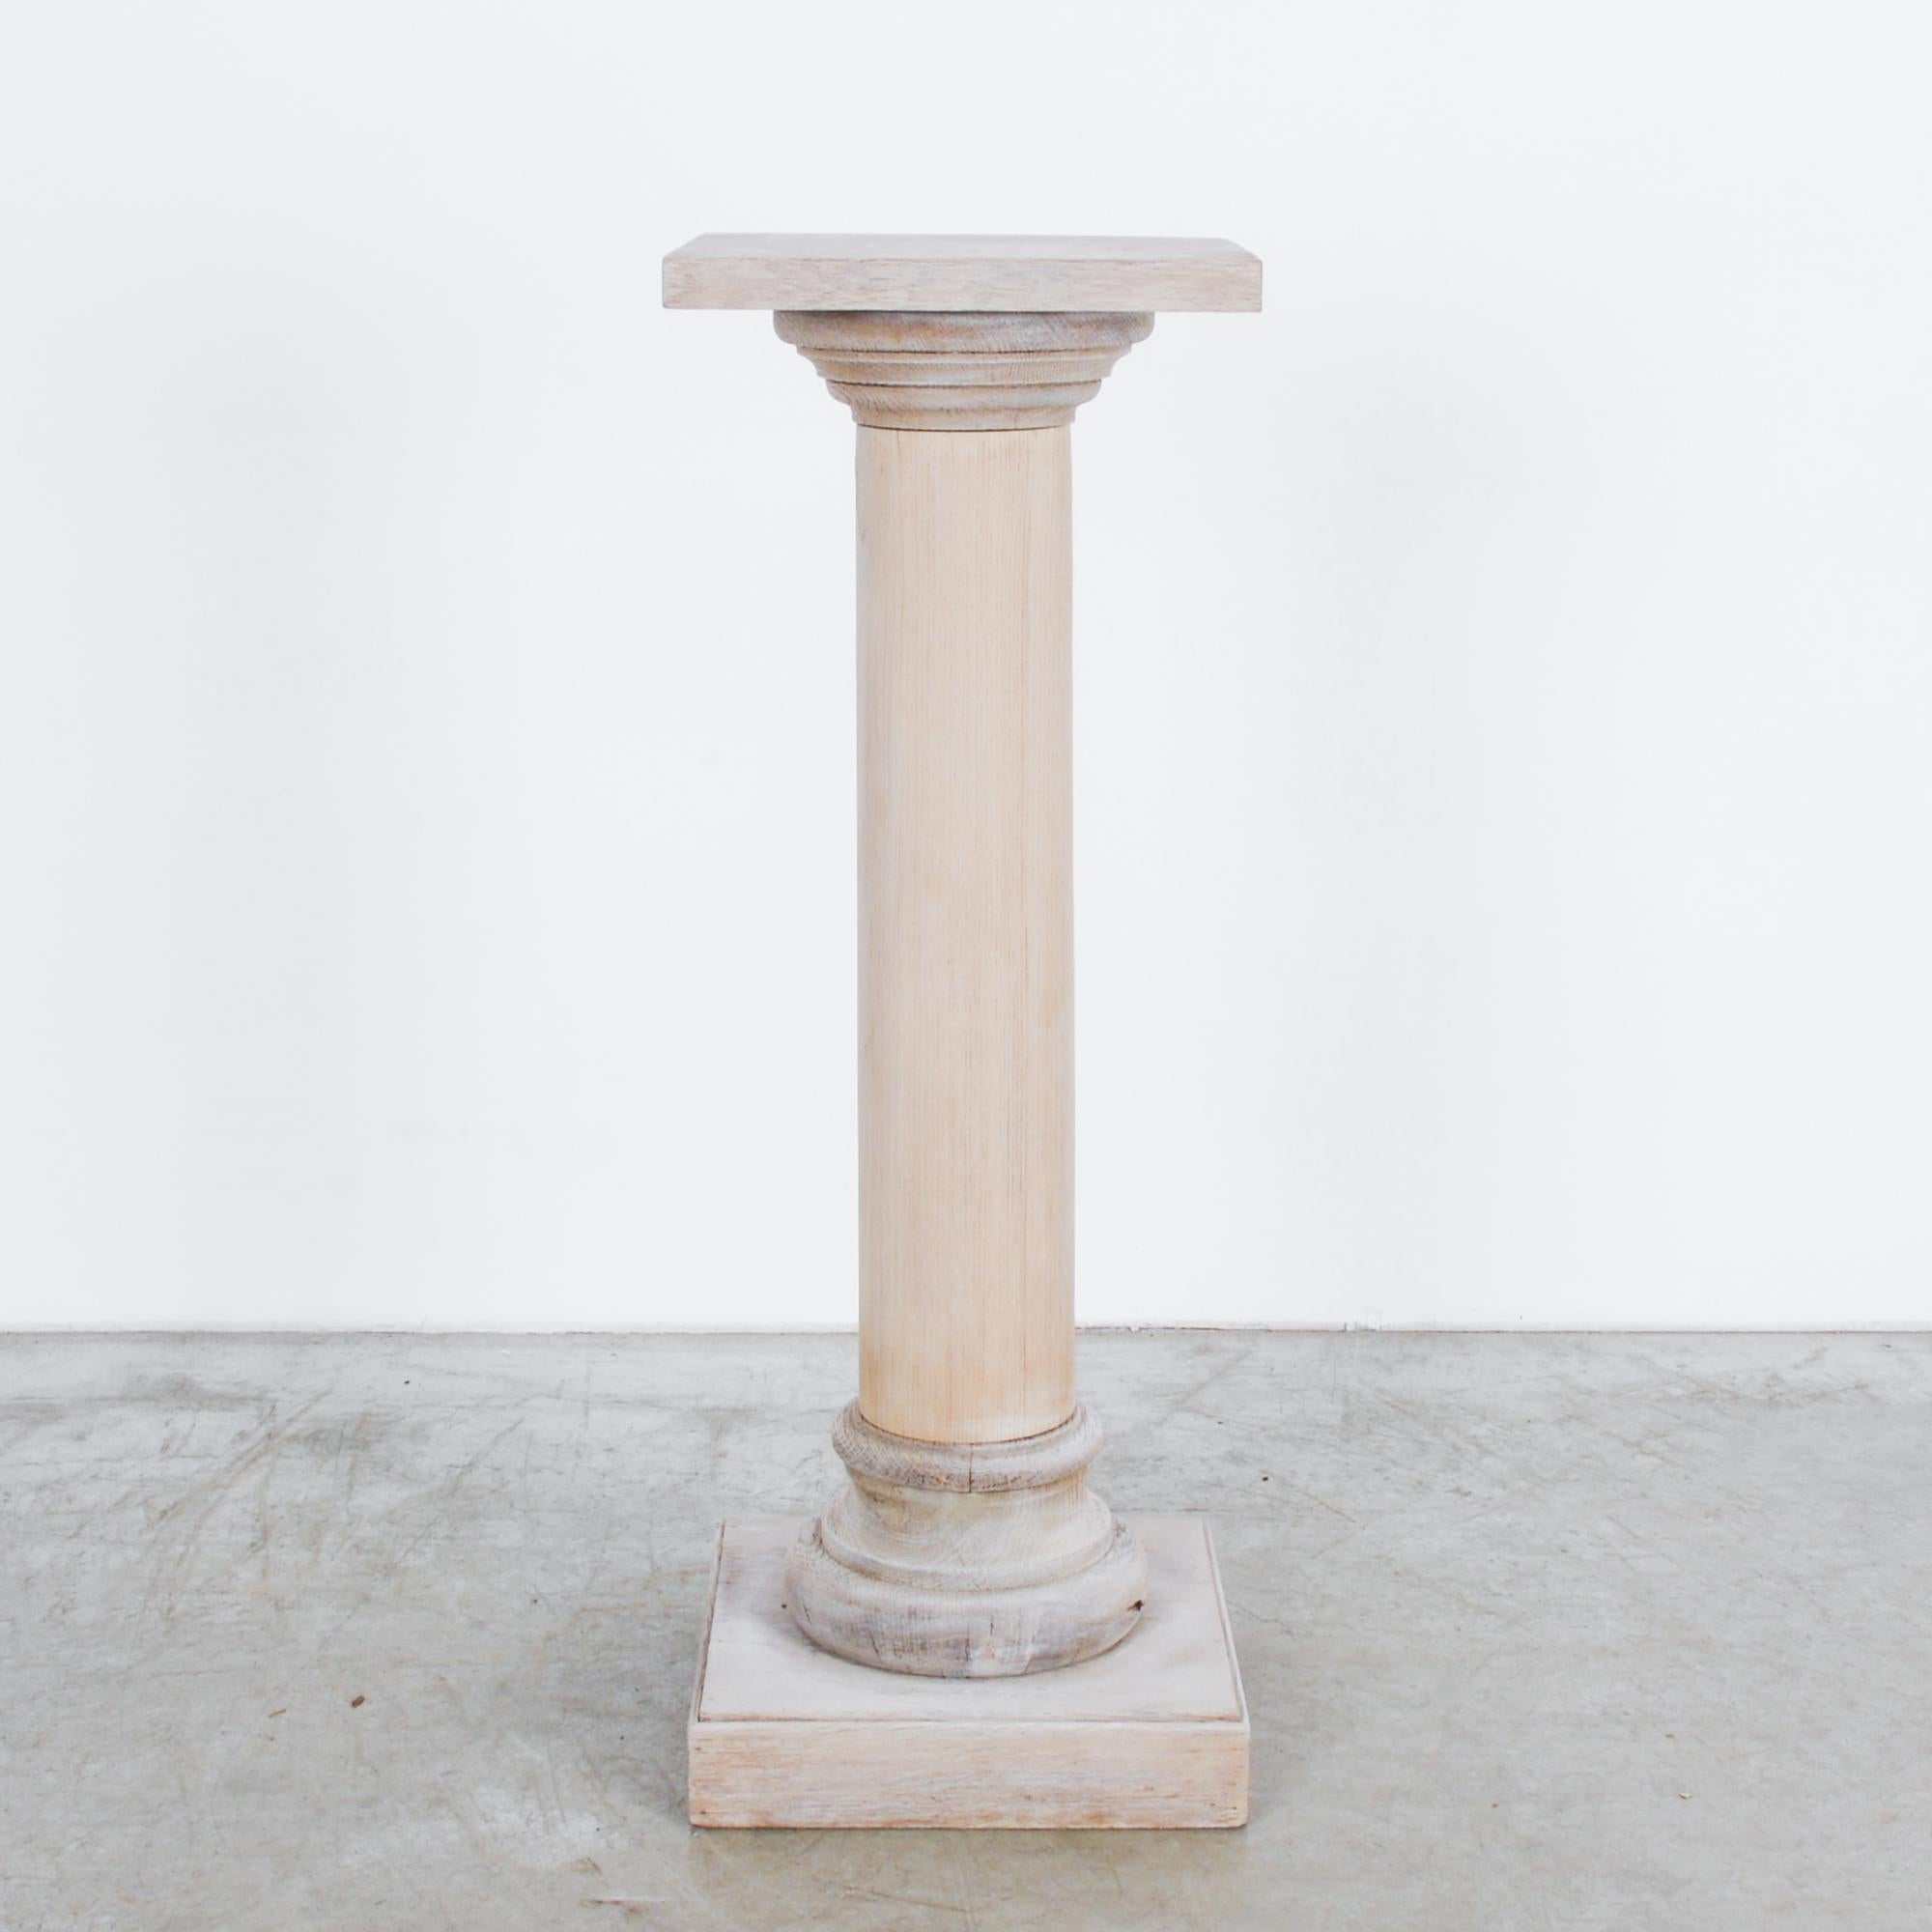 This bleached oak pedestal was made in Belgium and features a subtle neoclassical allusion with an unadorned shaft, a capital, and a base. With its smooth finish and exquisite wood grain, the pedestal will bring an understated elegance to any